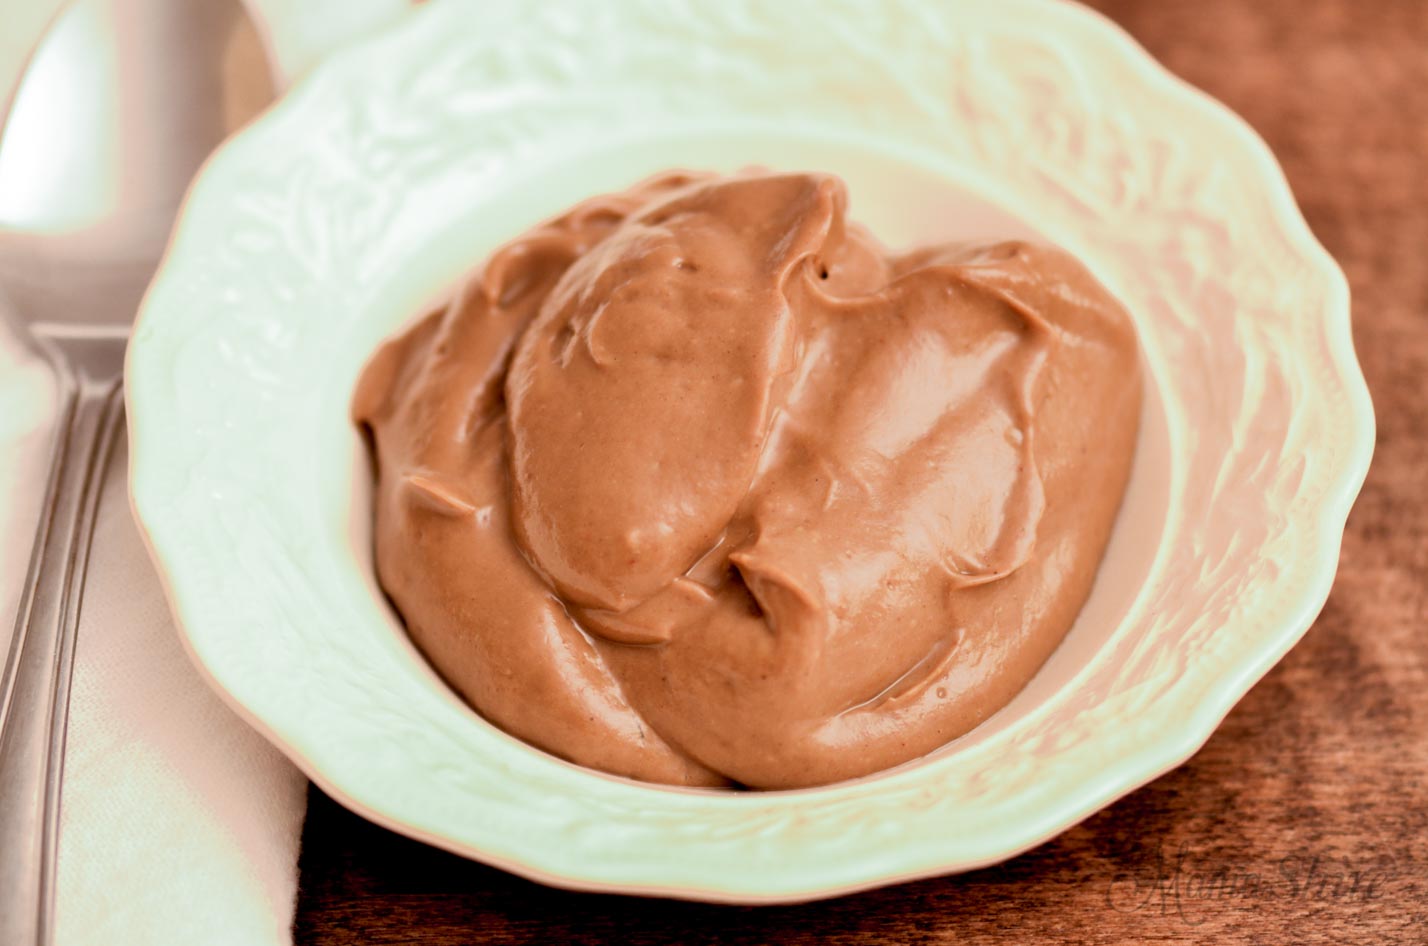 Bowl of creamy chocolate pudding made with avocados. Healthy and delicious! 